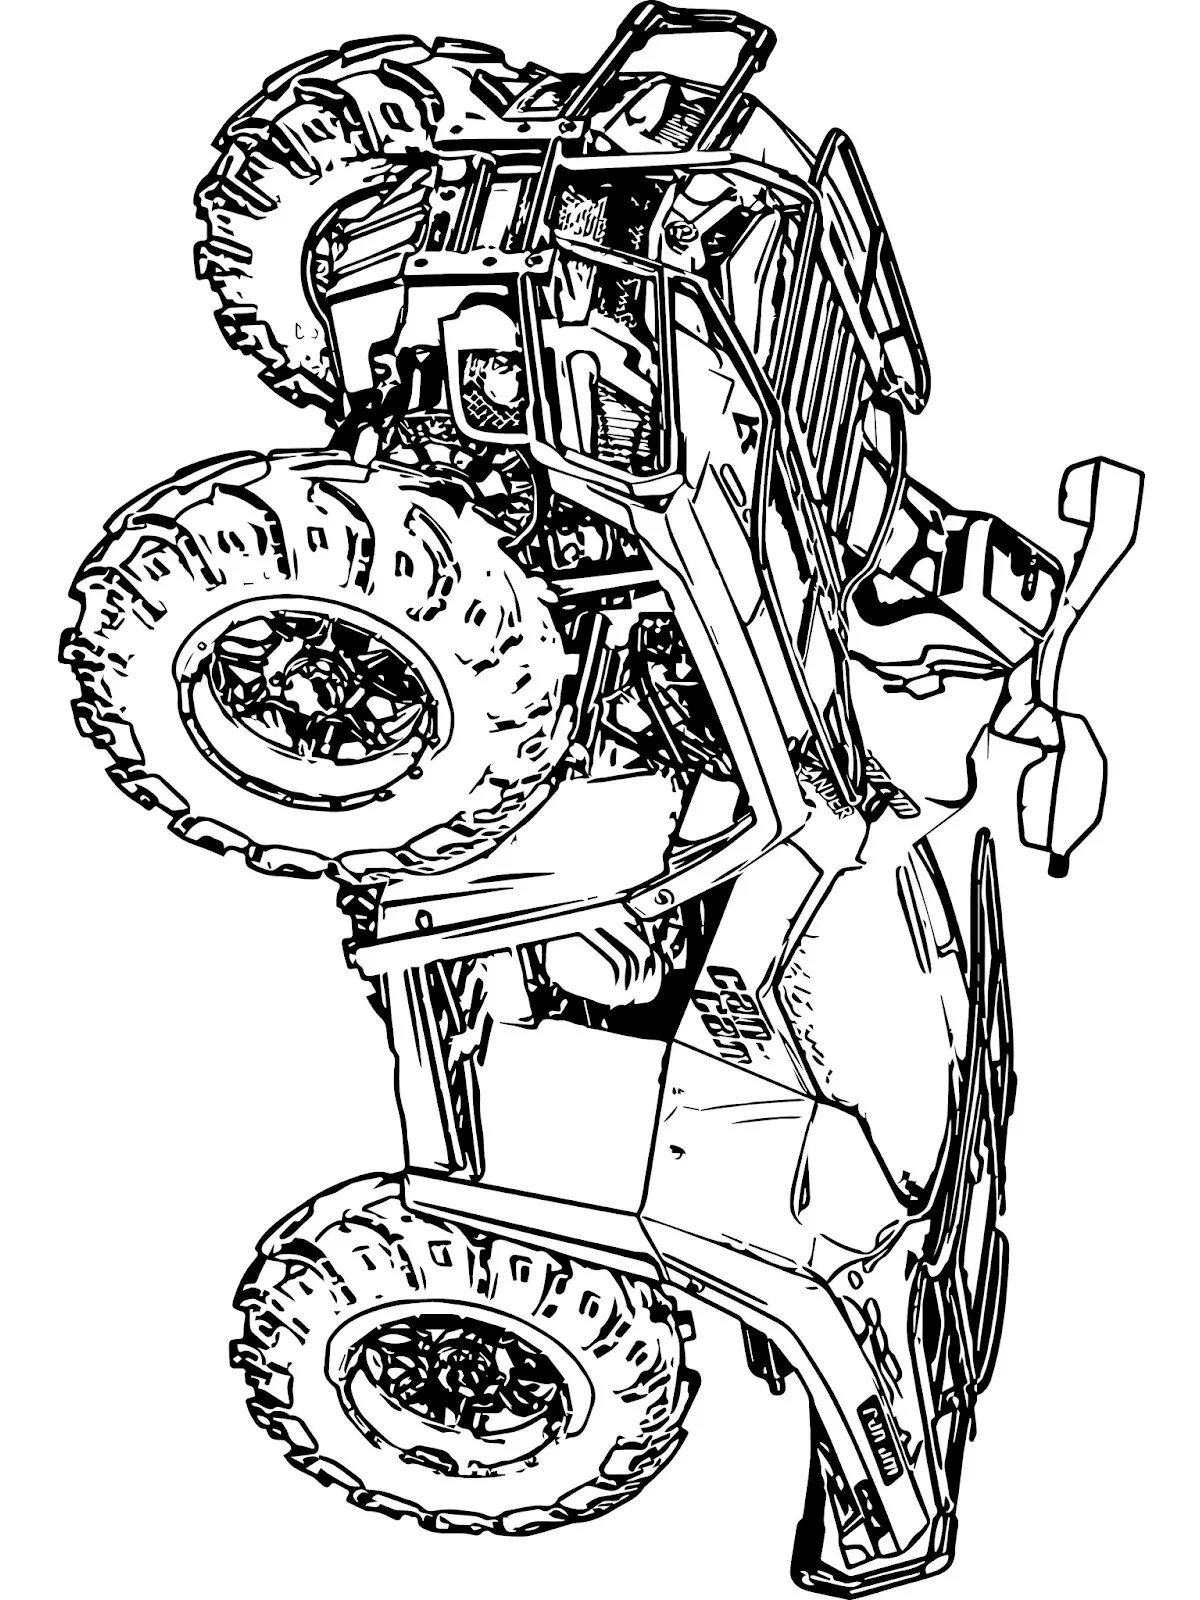 Shiny ATV coloring pages for boys